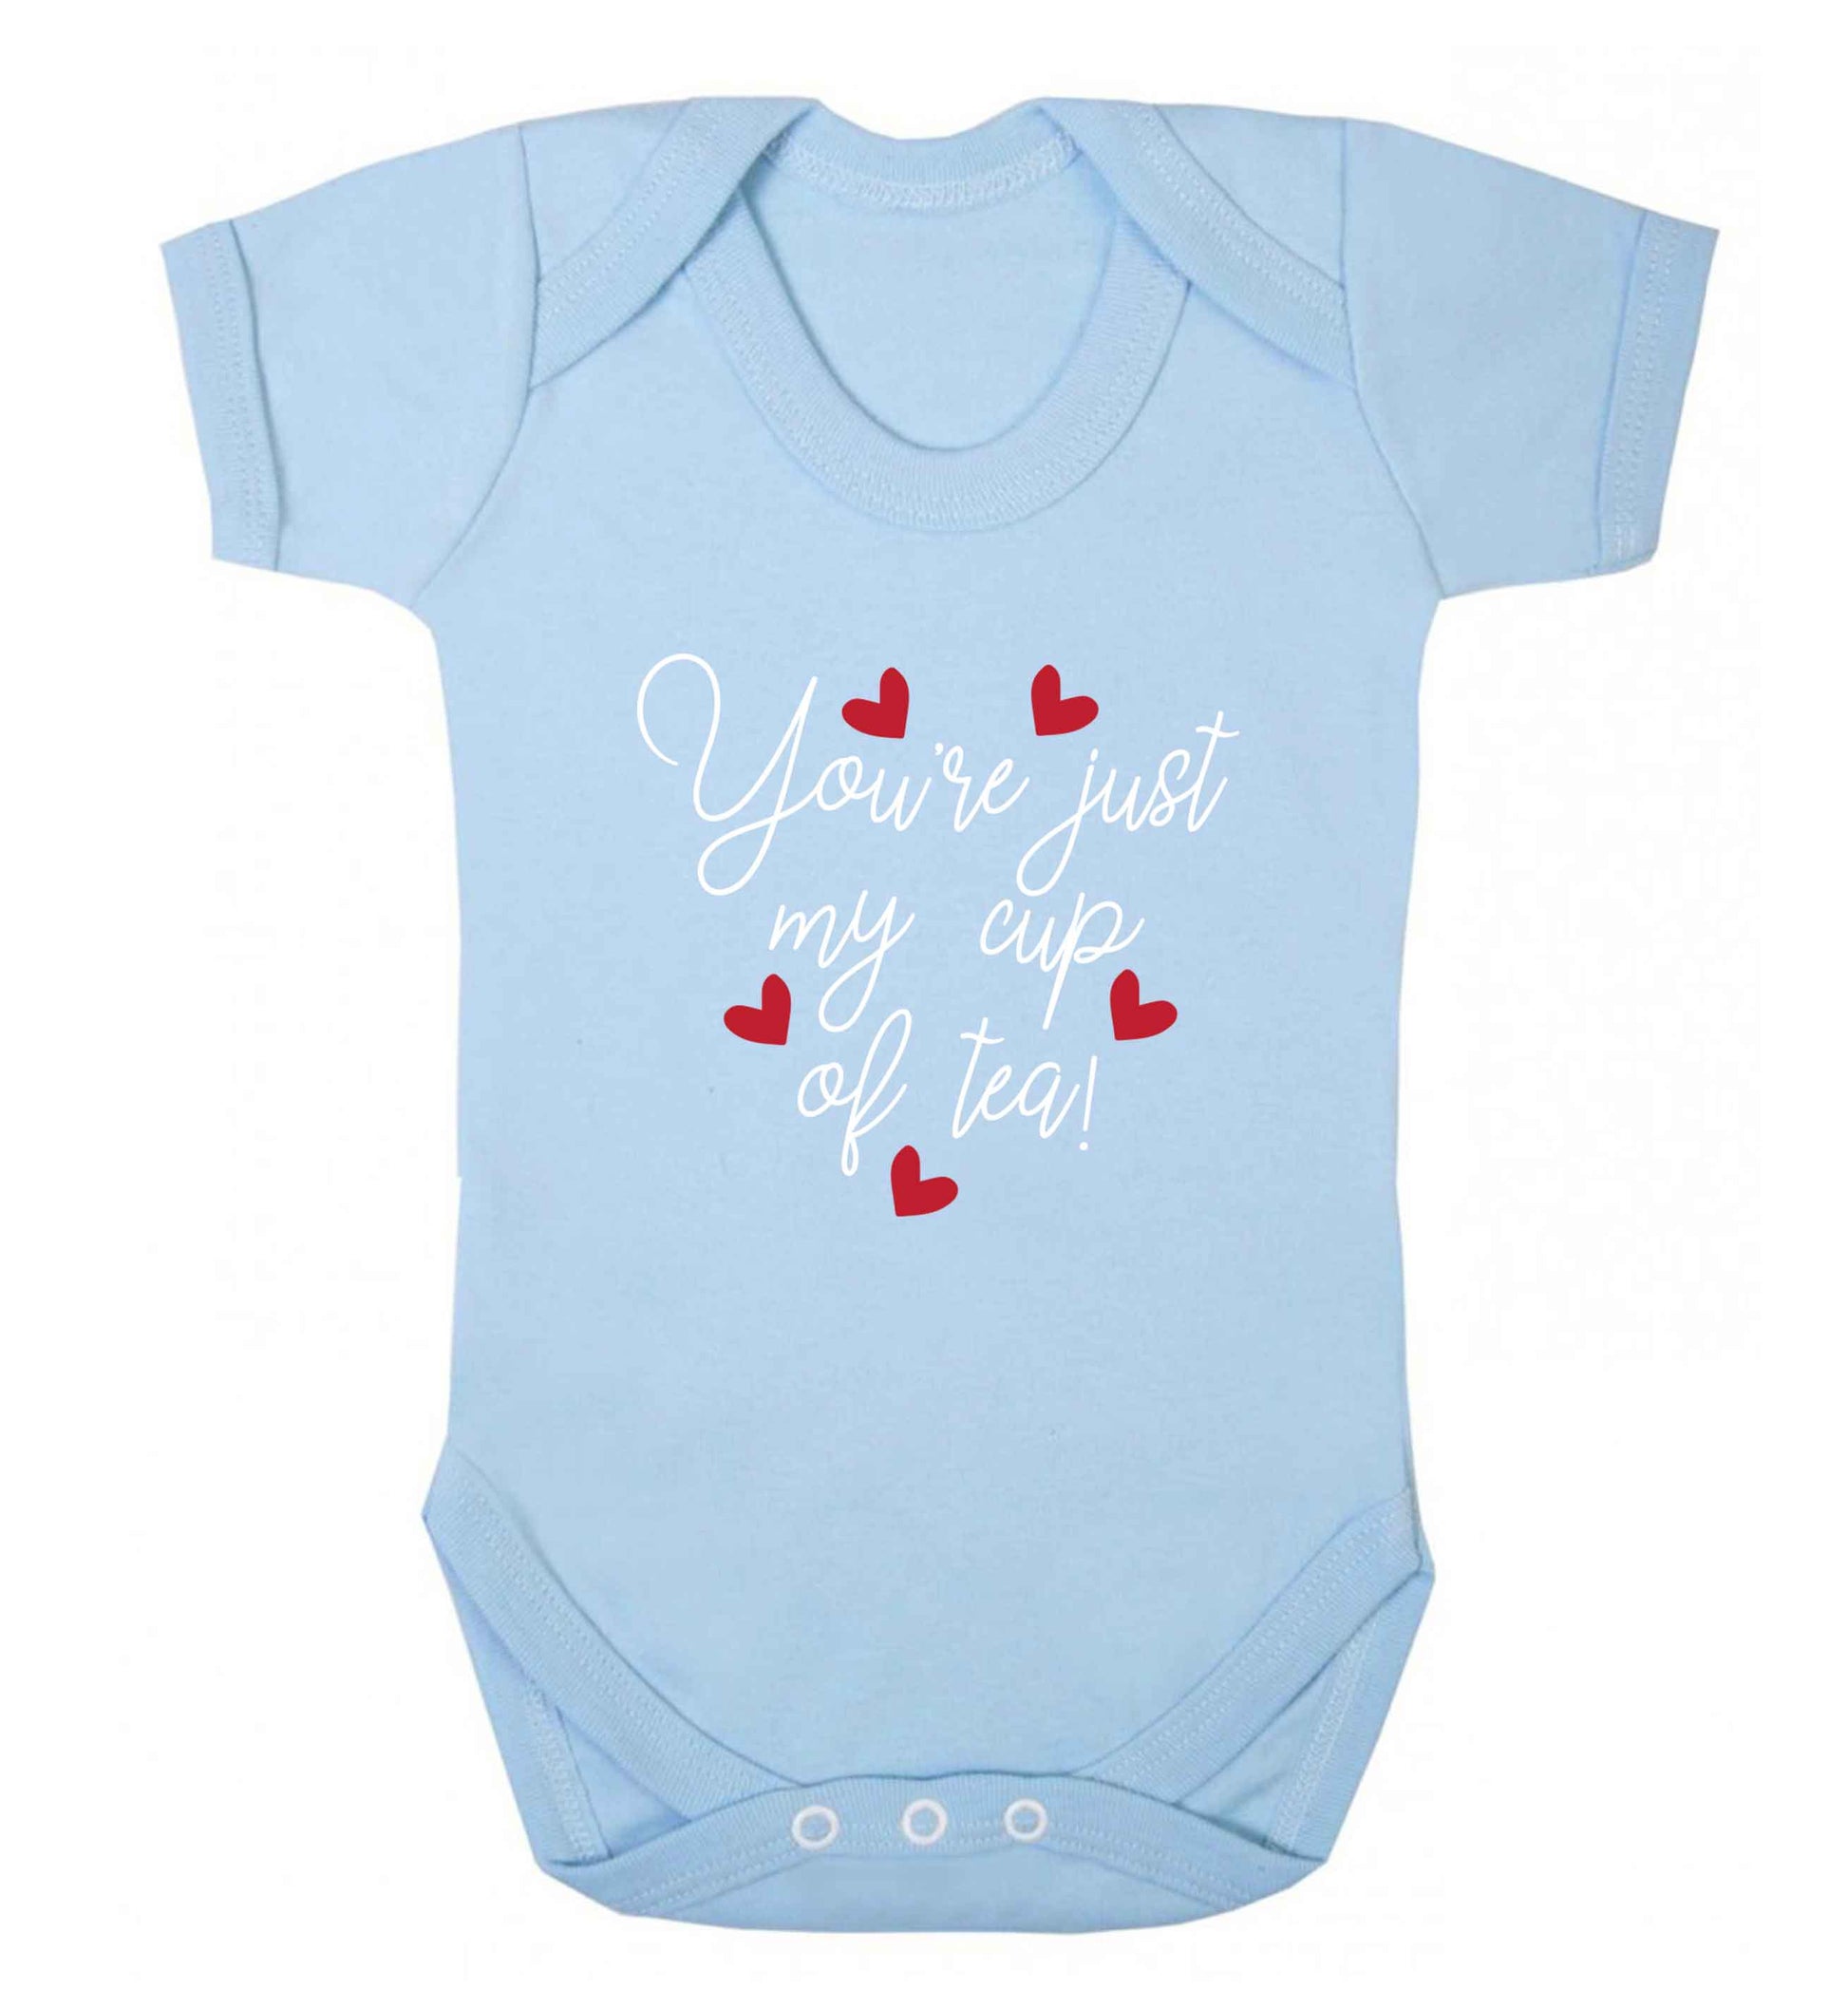 You're just my cup of tea baby vest pale blue 18-24 months